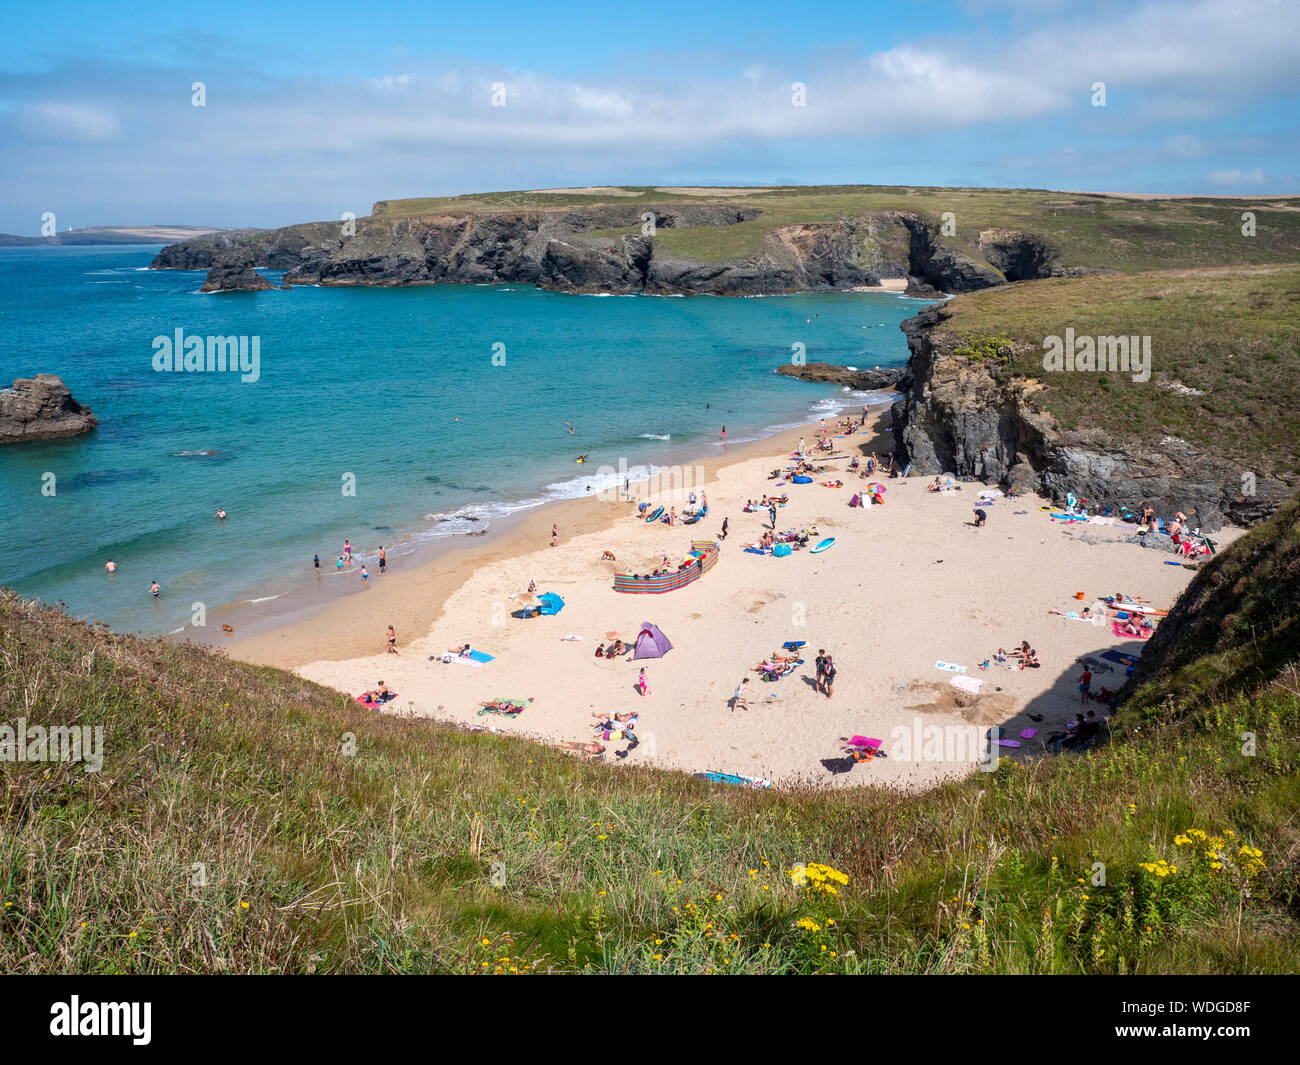 The beach at Porthcothan Bay, on the north Cornwall coast, Cornwall UK on a busy summer day. Stock Photo